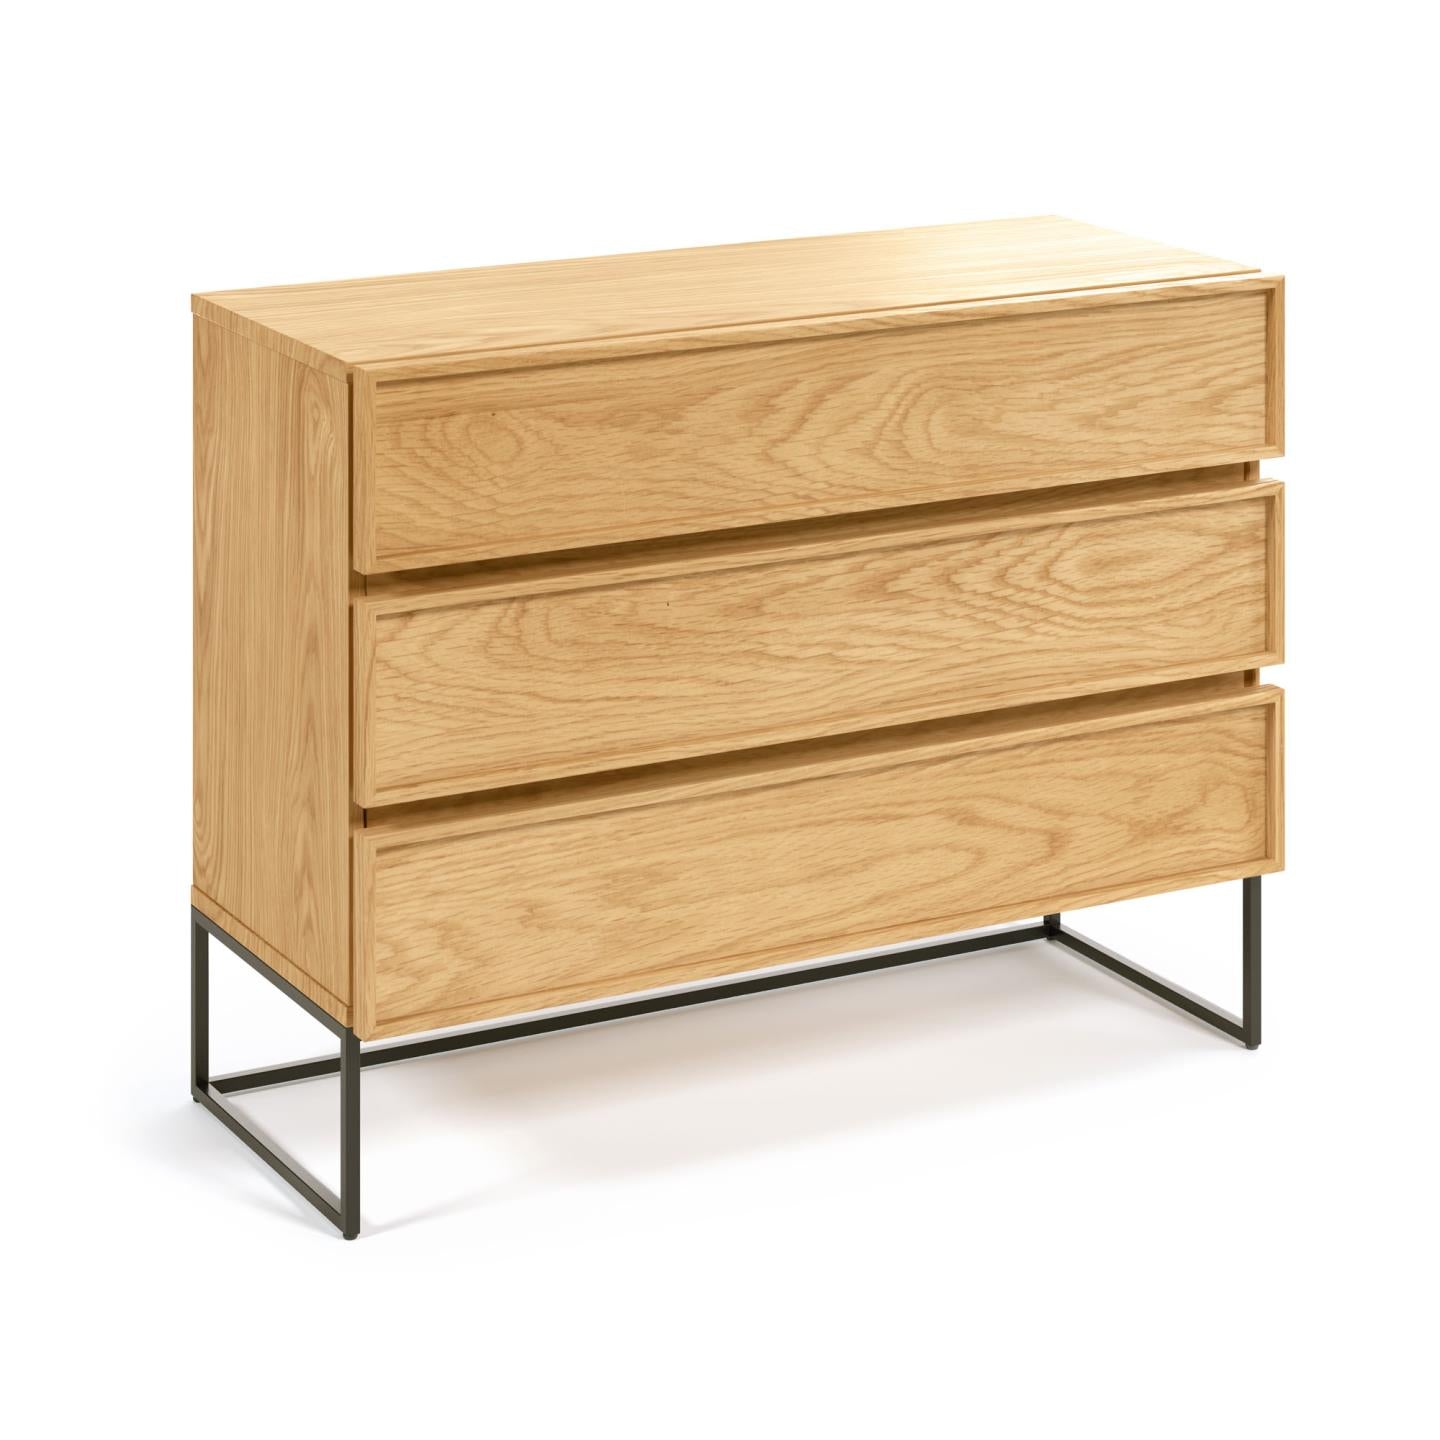 Taiana chest of drawers with oak veneer and steel frame with black finish 100 x 78 cm